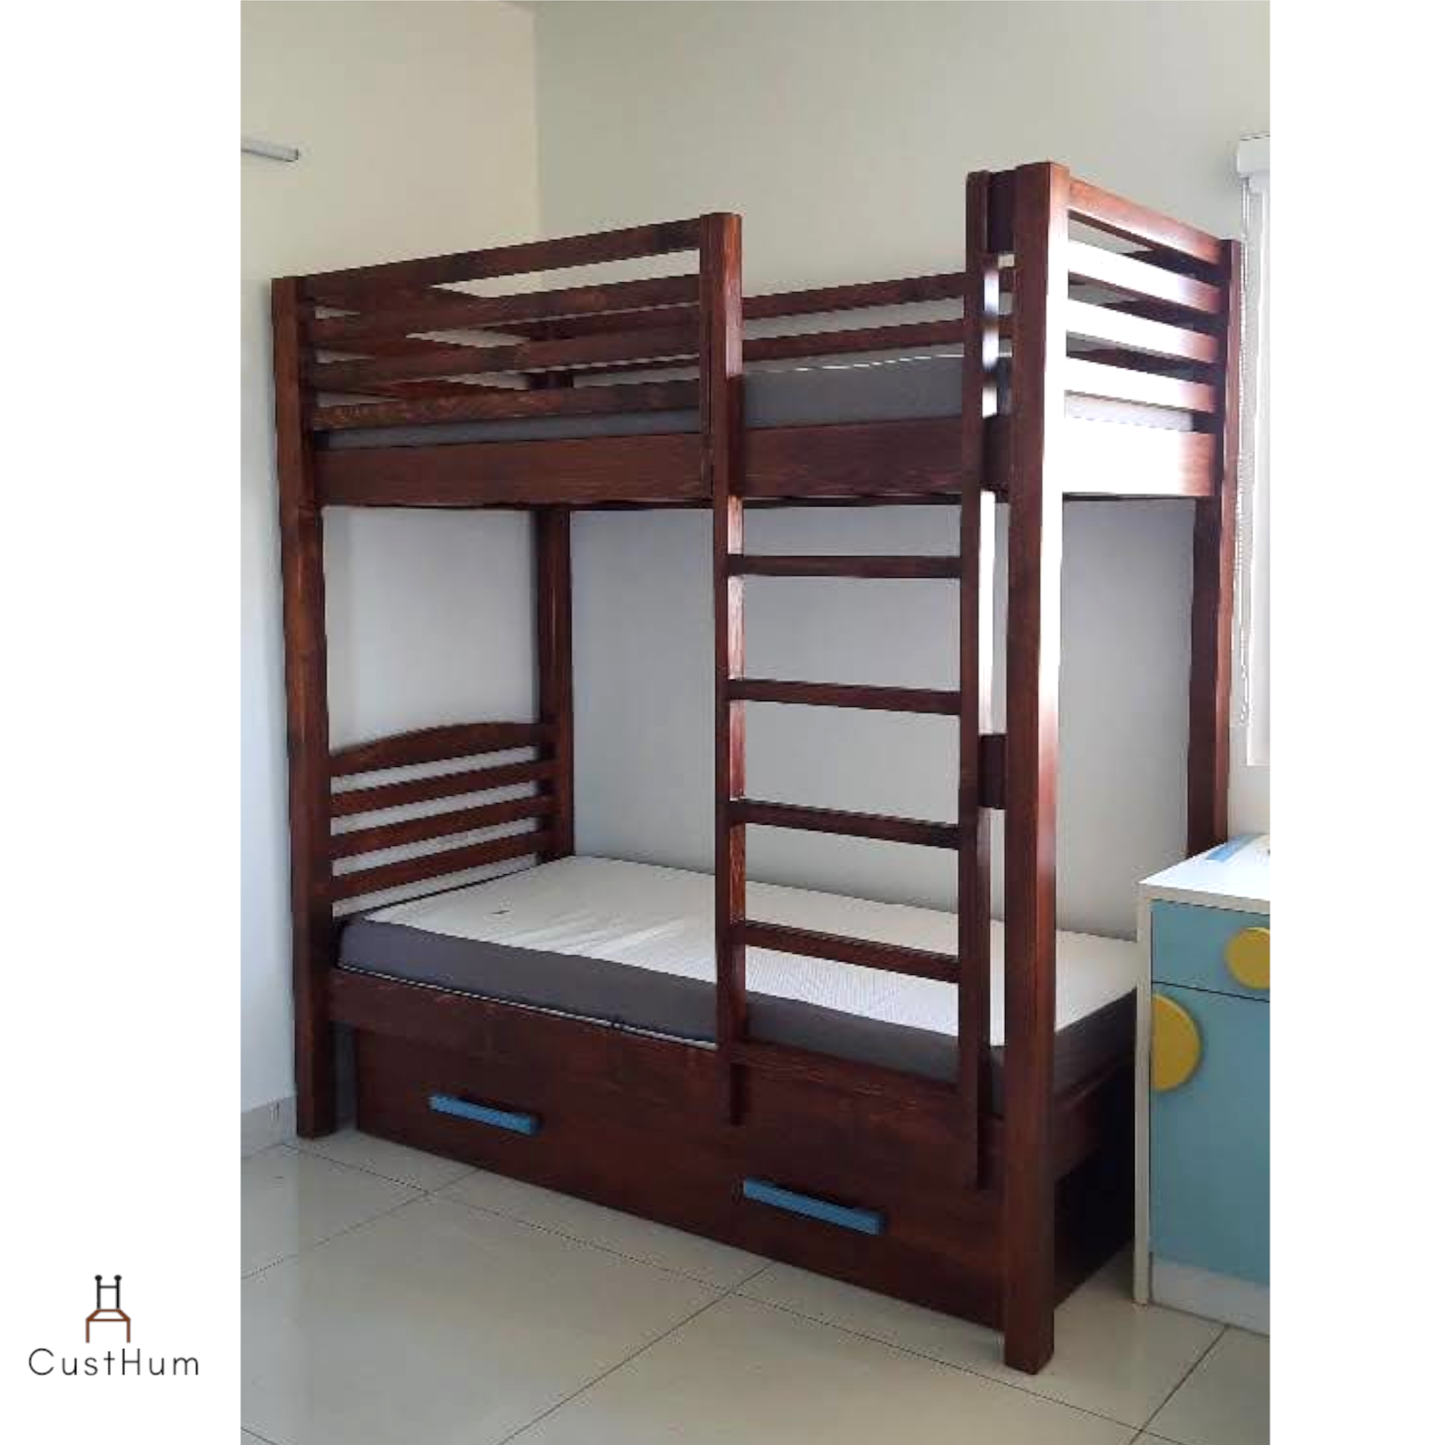 CustHum Genie-bunk bed for kids with removable under cot storage box with long handles (closed)